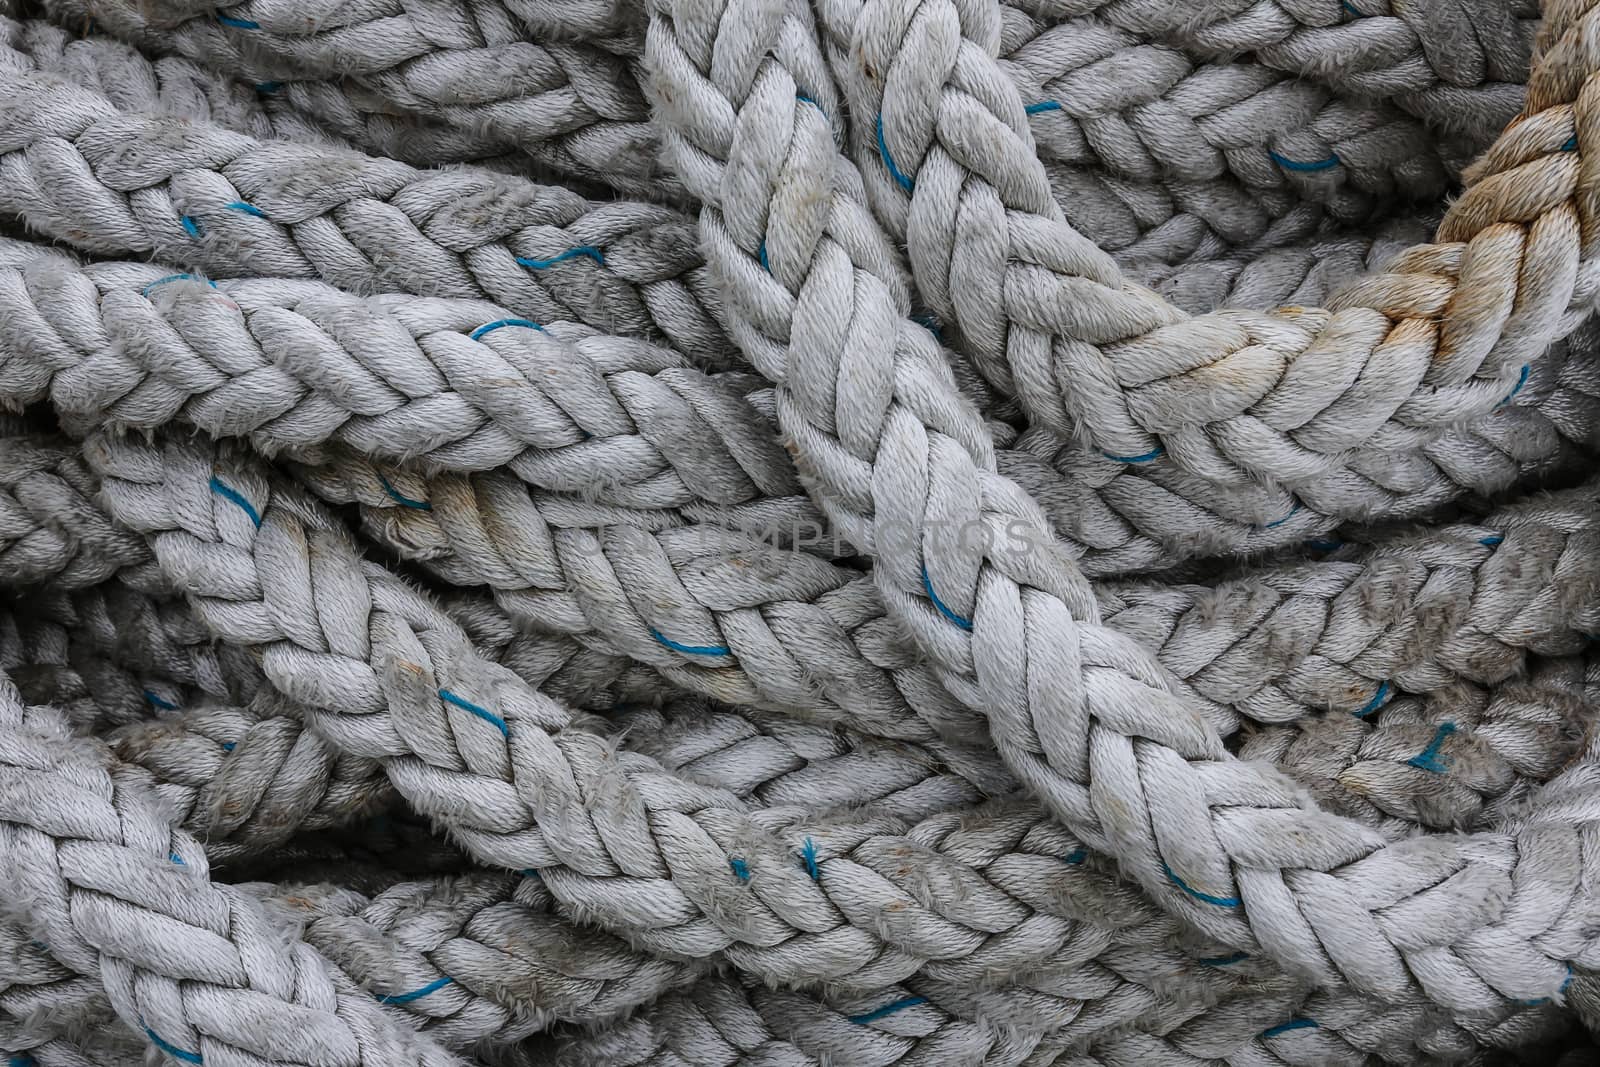 Coils of strong rope by SteveAllenPhoto